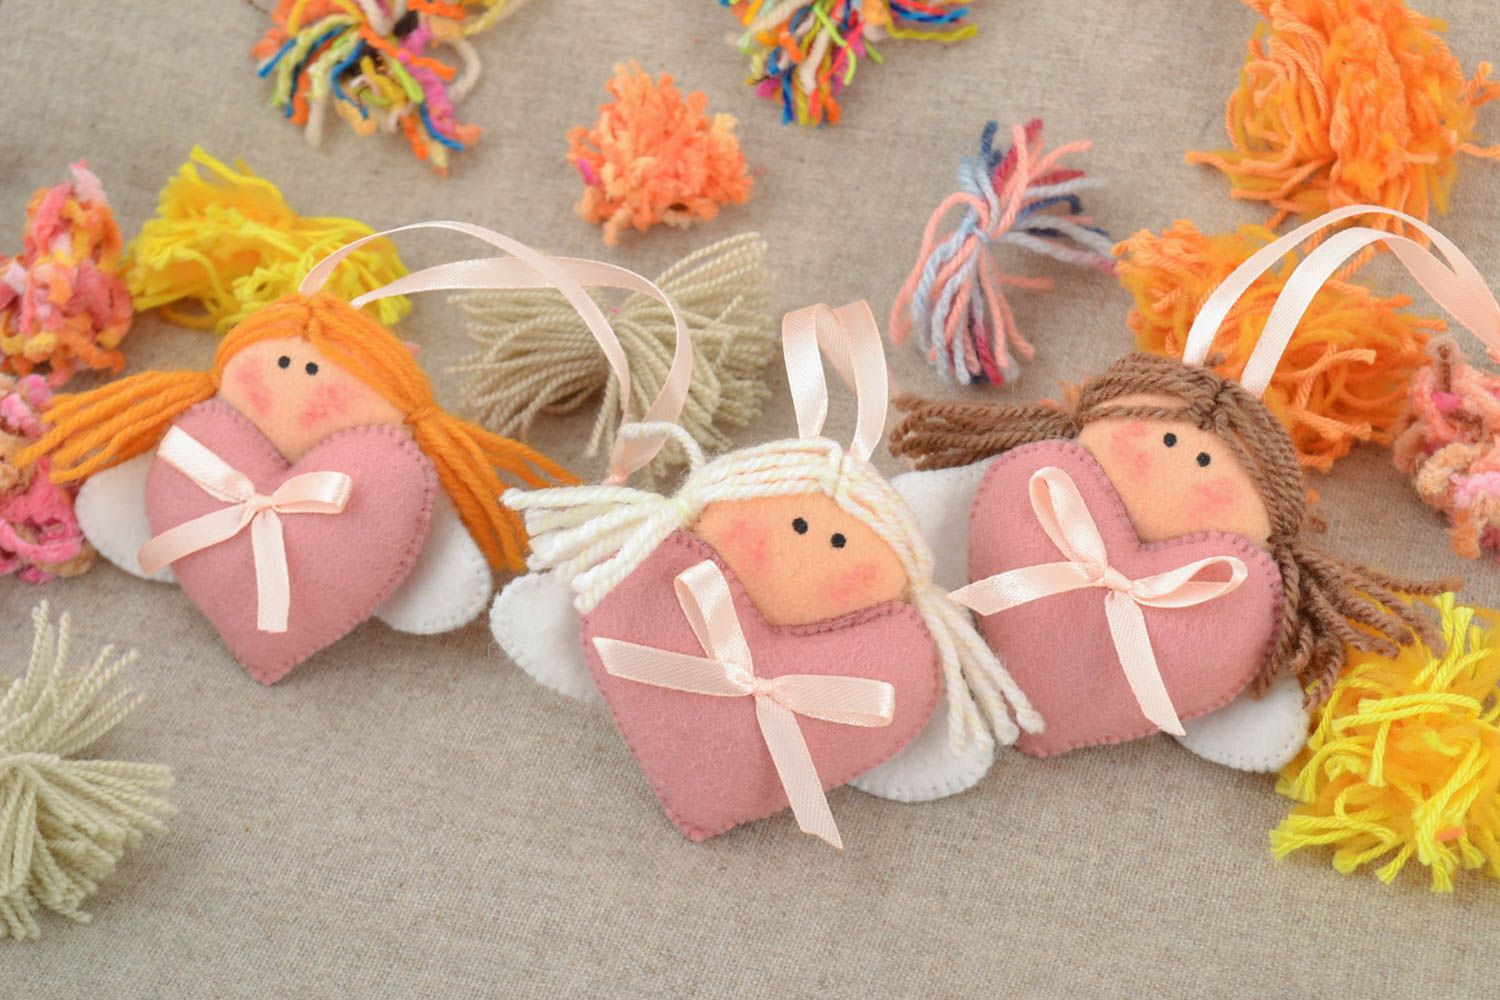 White and pink handmade designer soft wall hanging toys set 3 pieces Angels photo 1